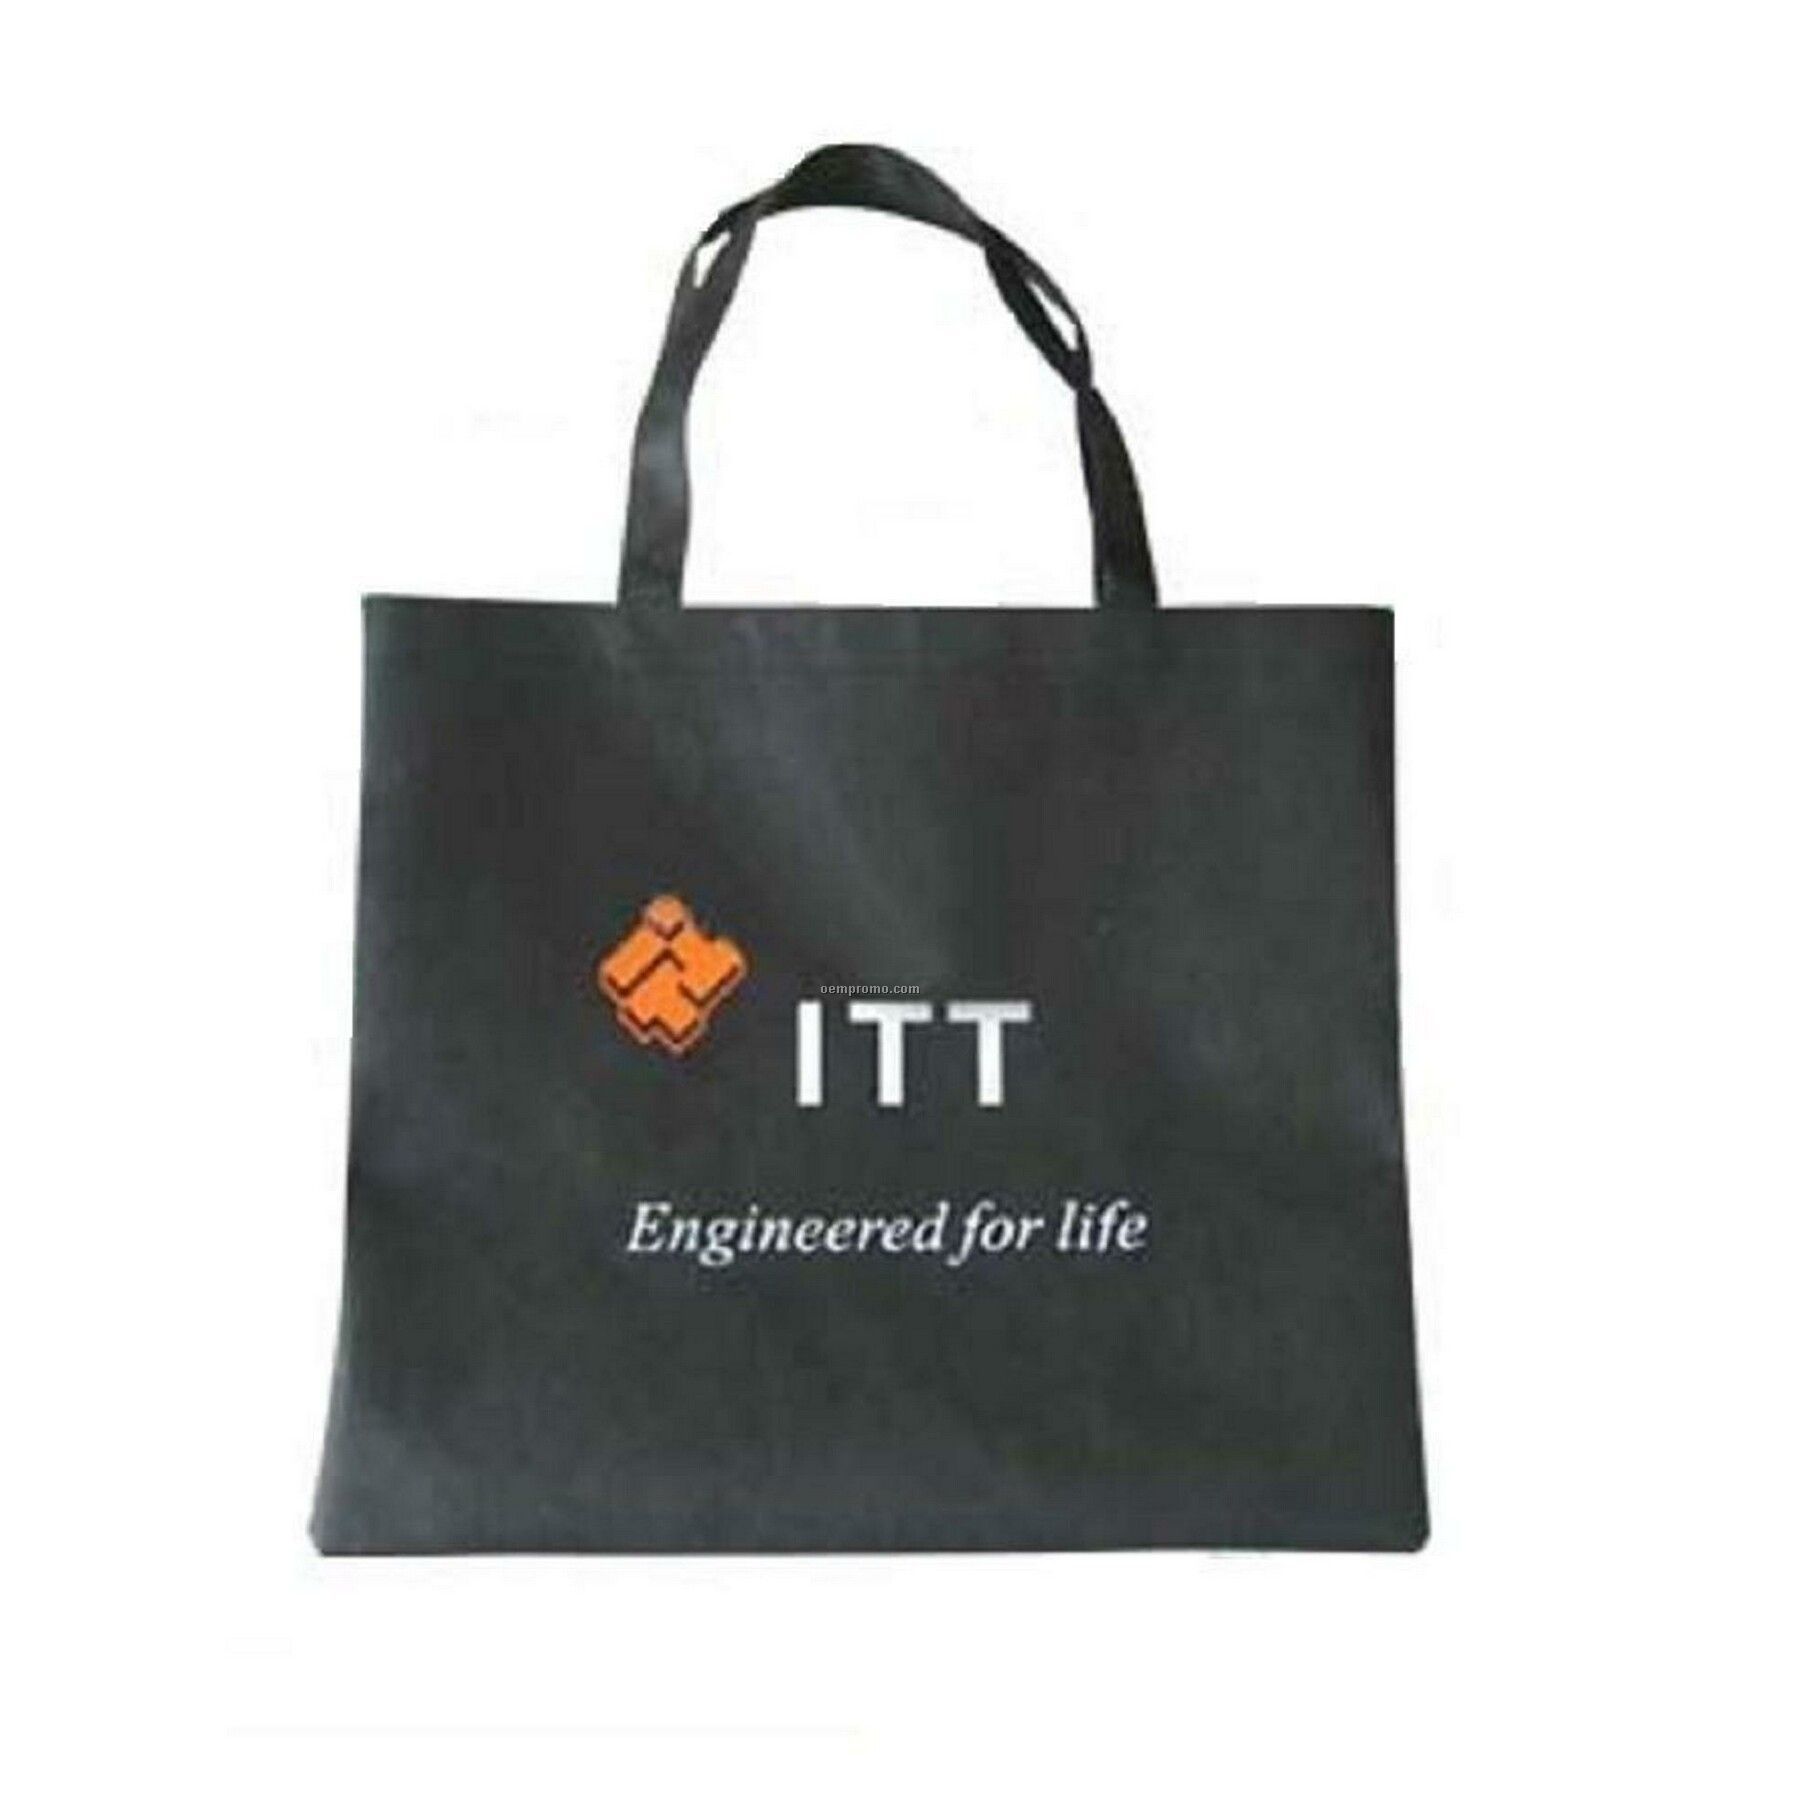 High Quality Non Woven Tote Bag. 80 Gsm Fabric, Measures 16"W X 15"H X 4"D